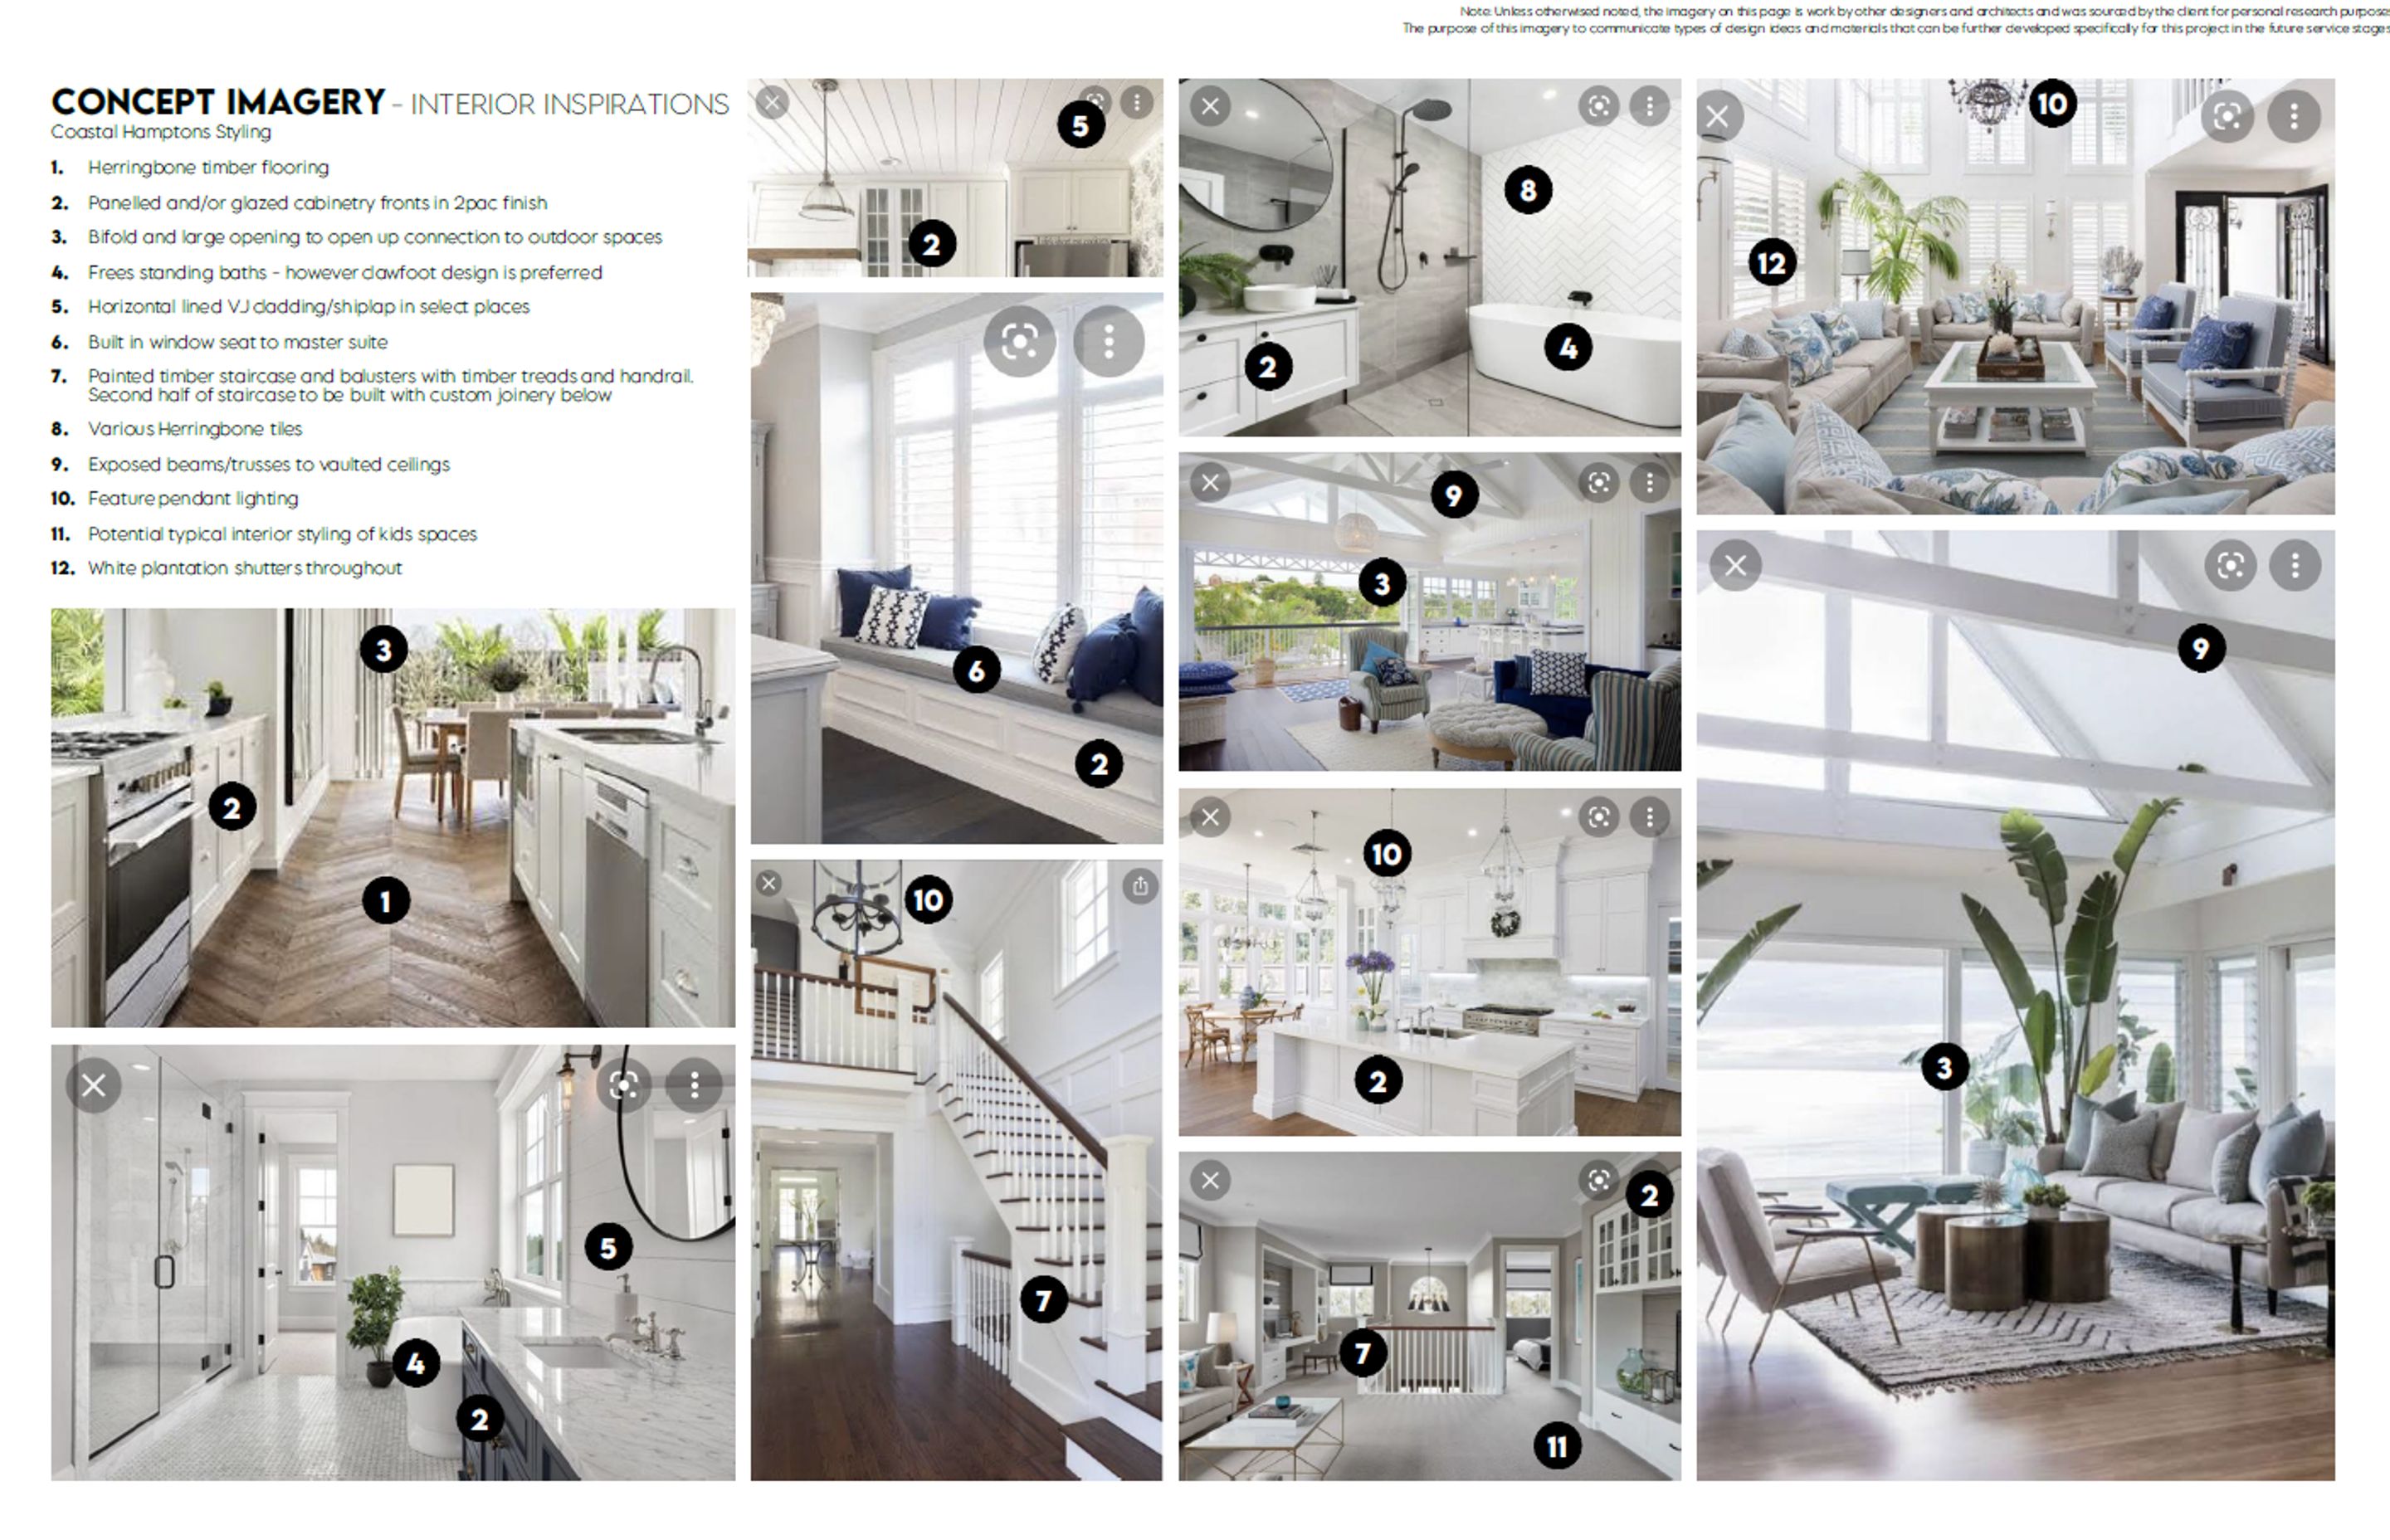 The Design Imagery photos themselves are not the work of BYO Floor Plan, unless otherwise noted. The photos are selected for the indicative representation of the ideas listed.